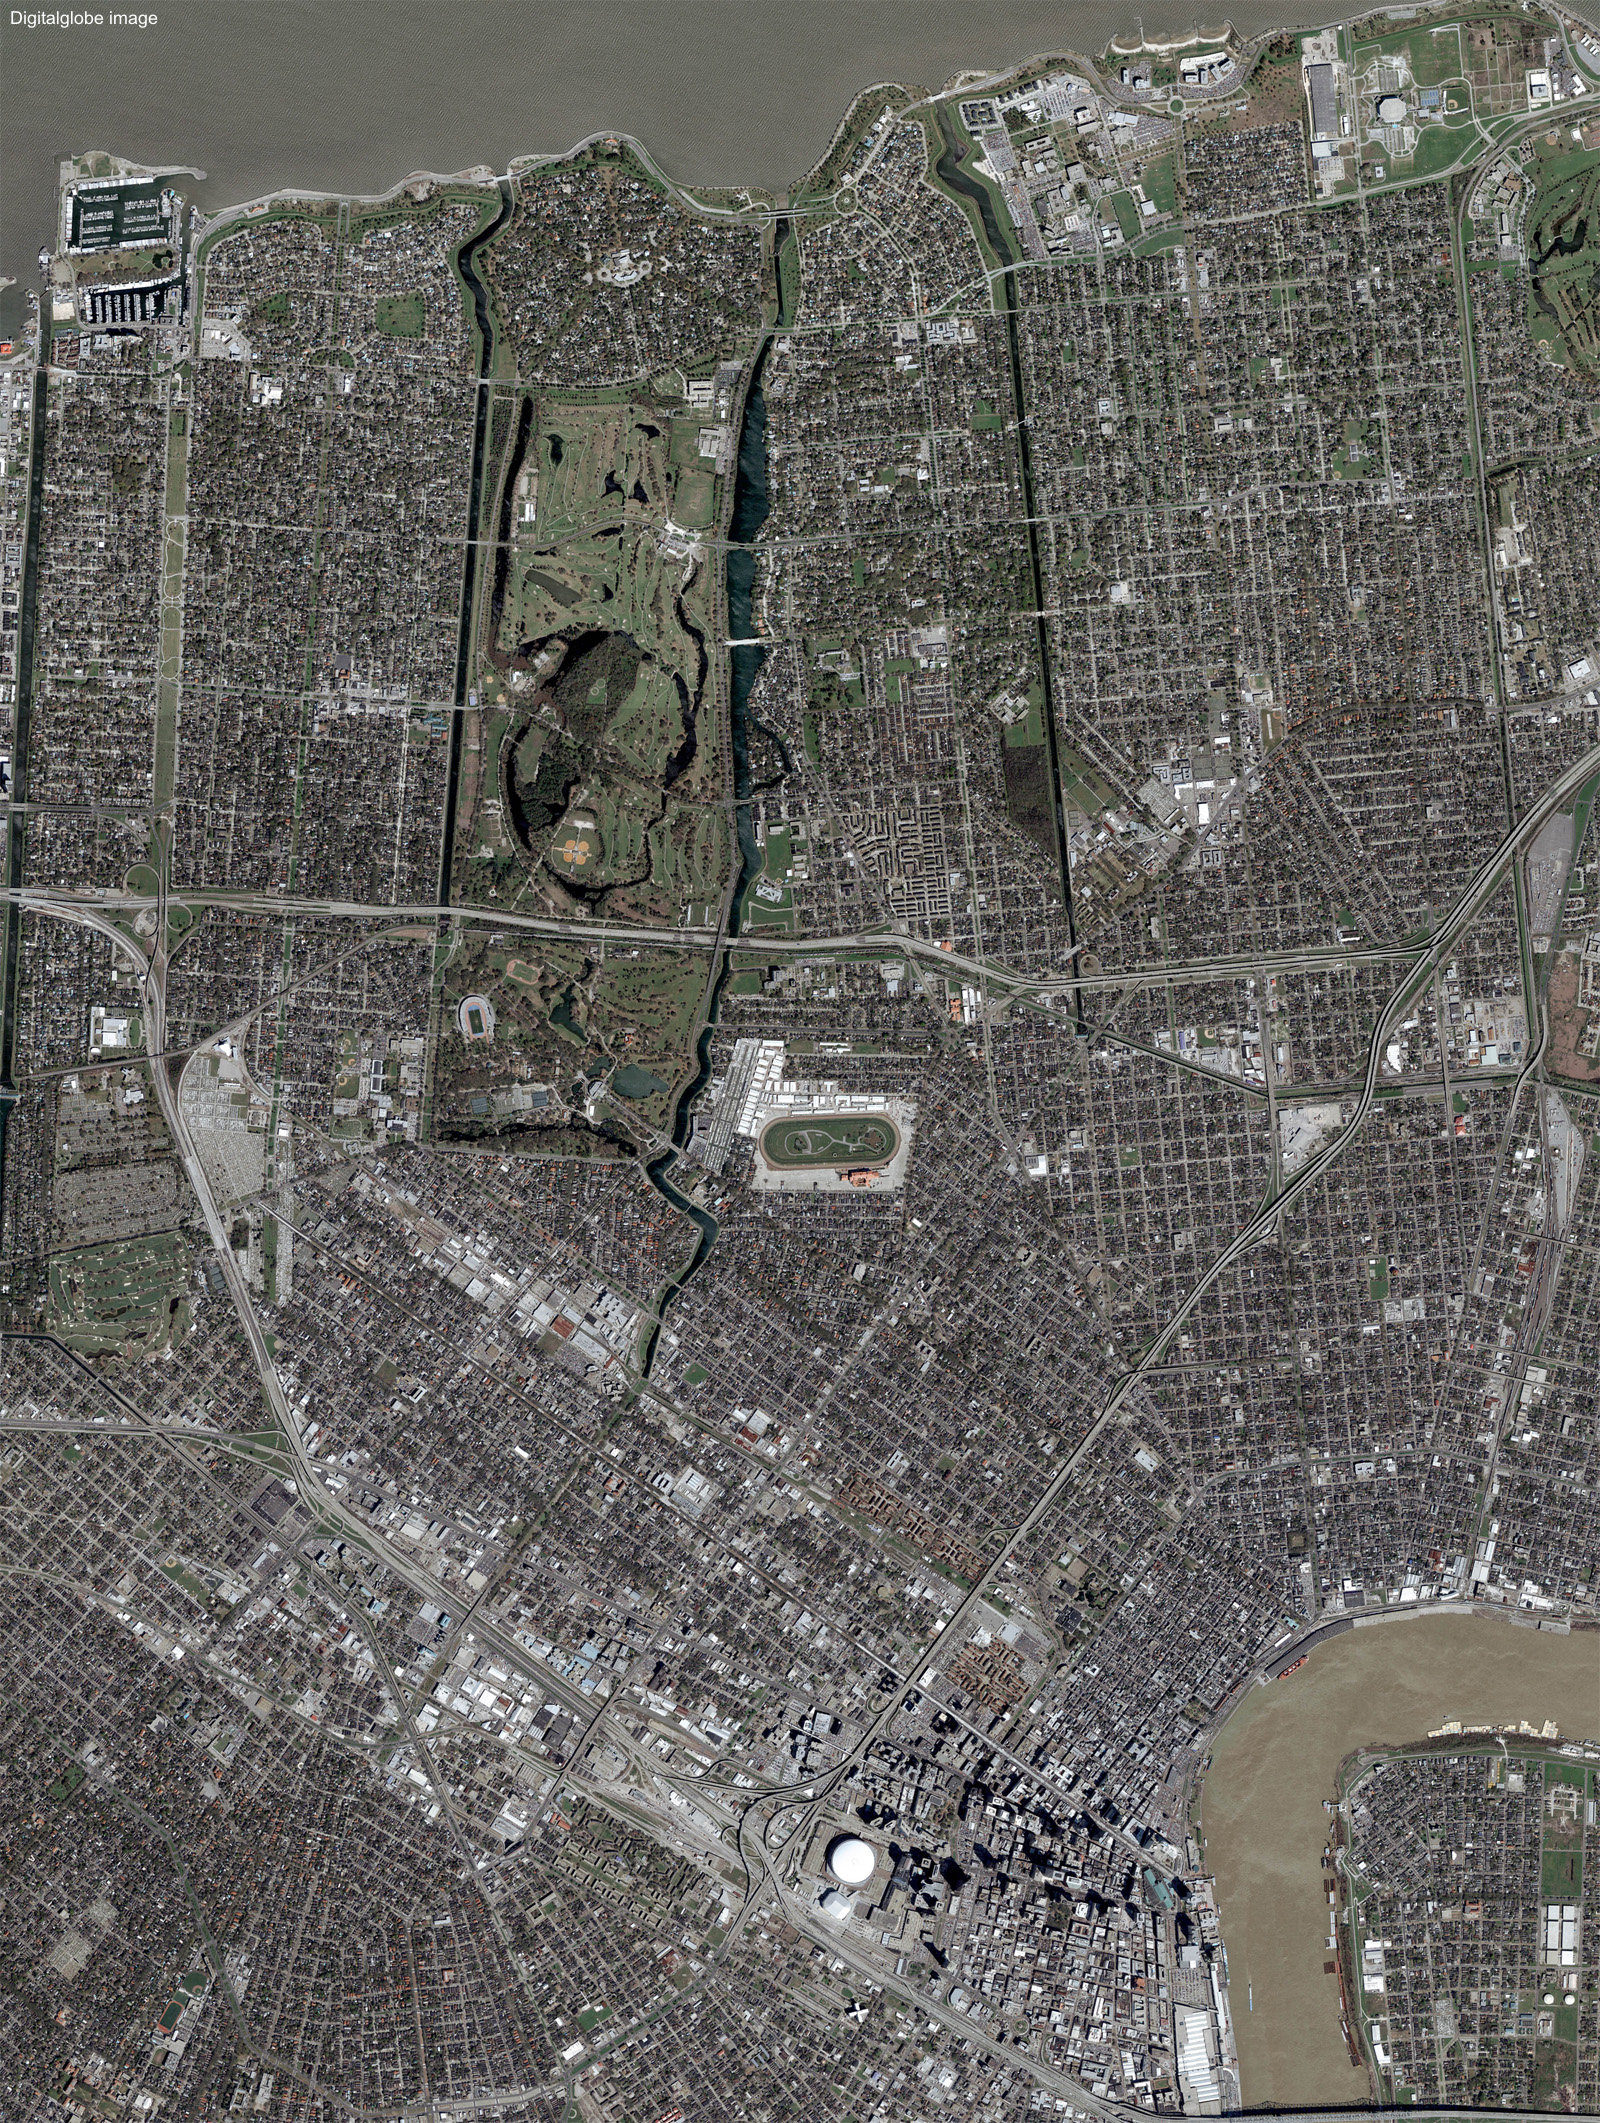 New Orleans before and after Katrina